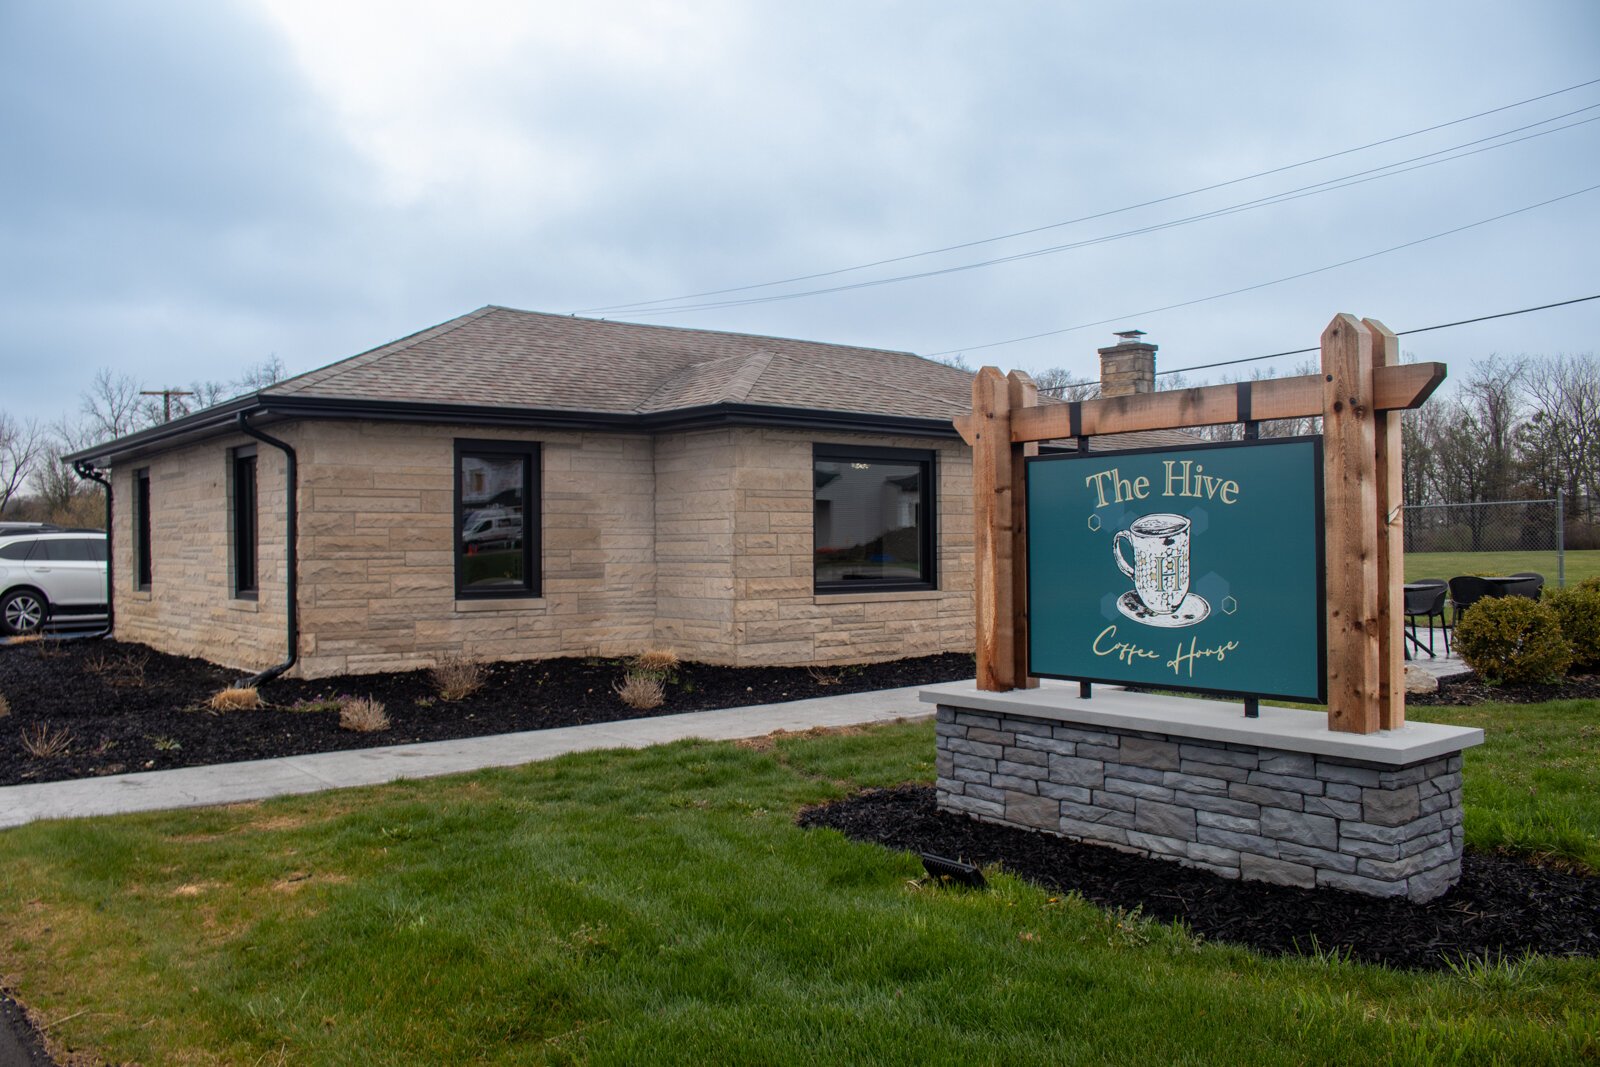 The Hive Coffee Shop is located at 7120 Homestead Road, Fort Wayne, IN 46814.